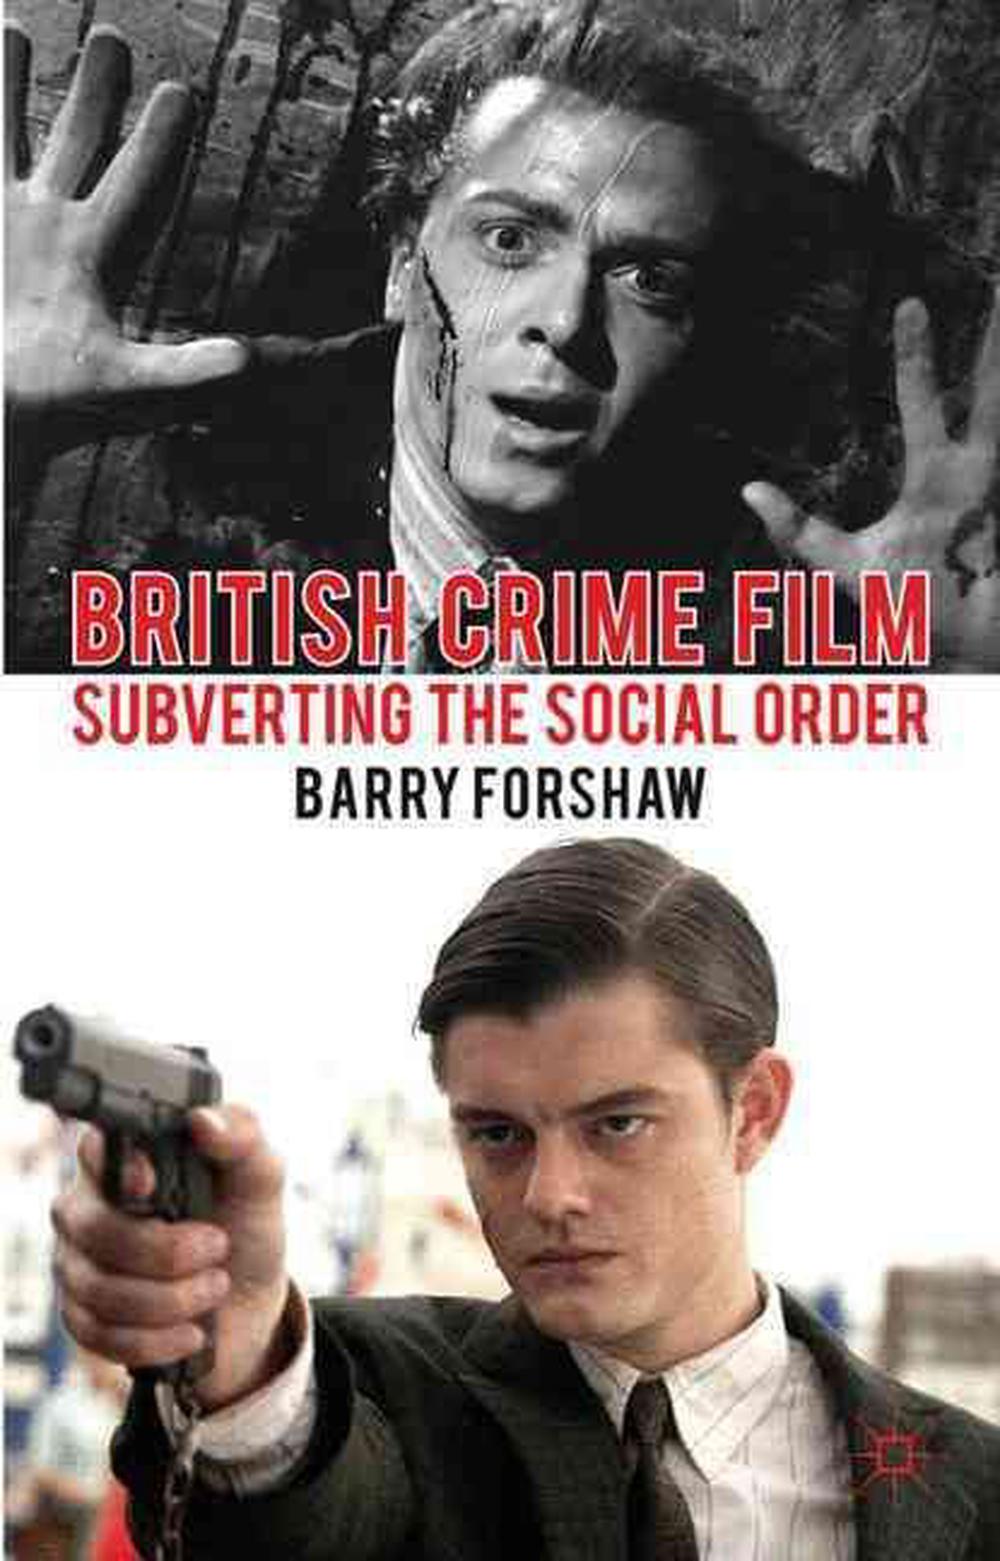 British Crime Film: Subverting the Social Order by Barry Forshaw ...